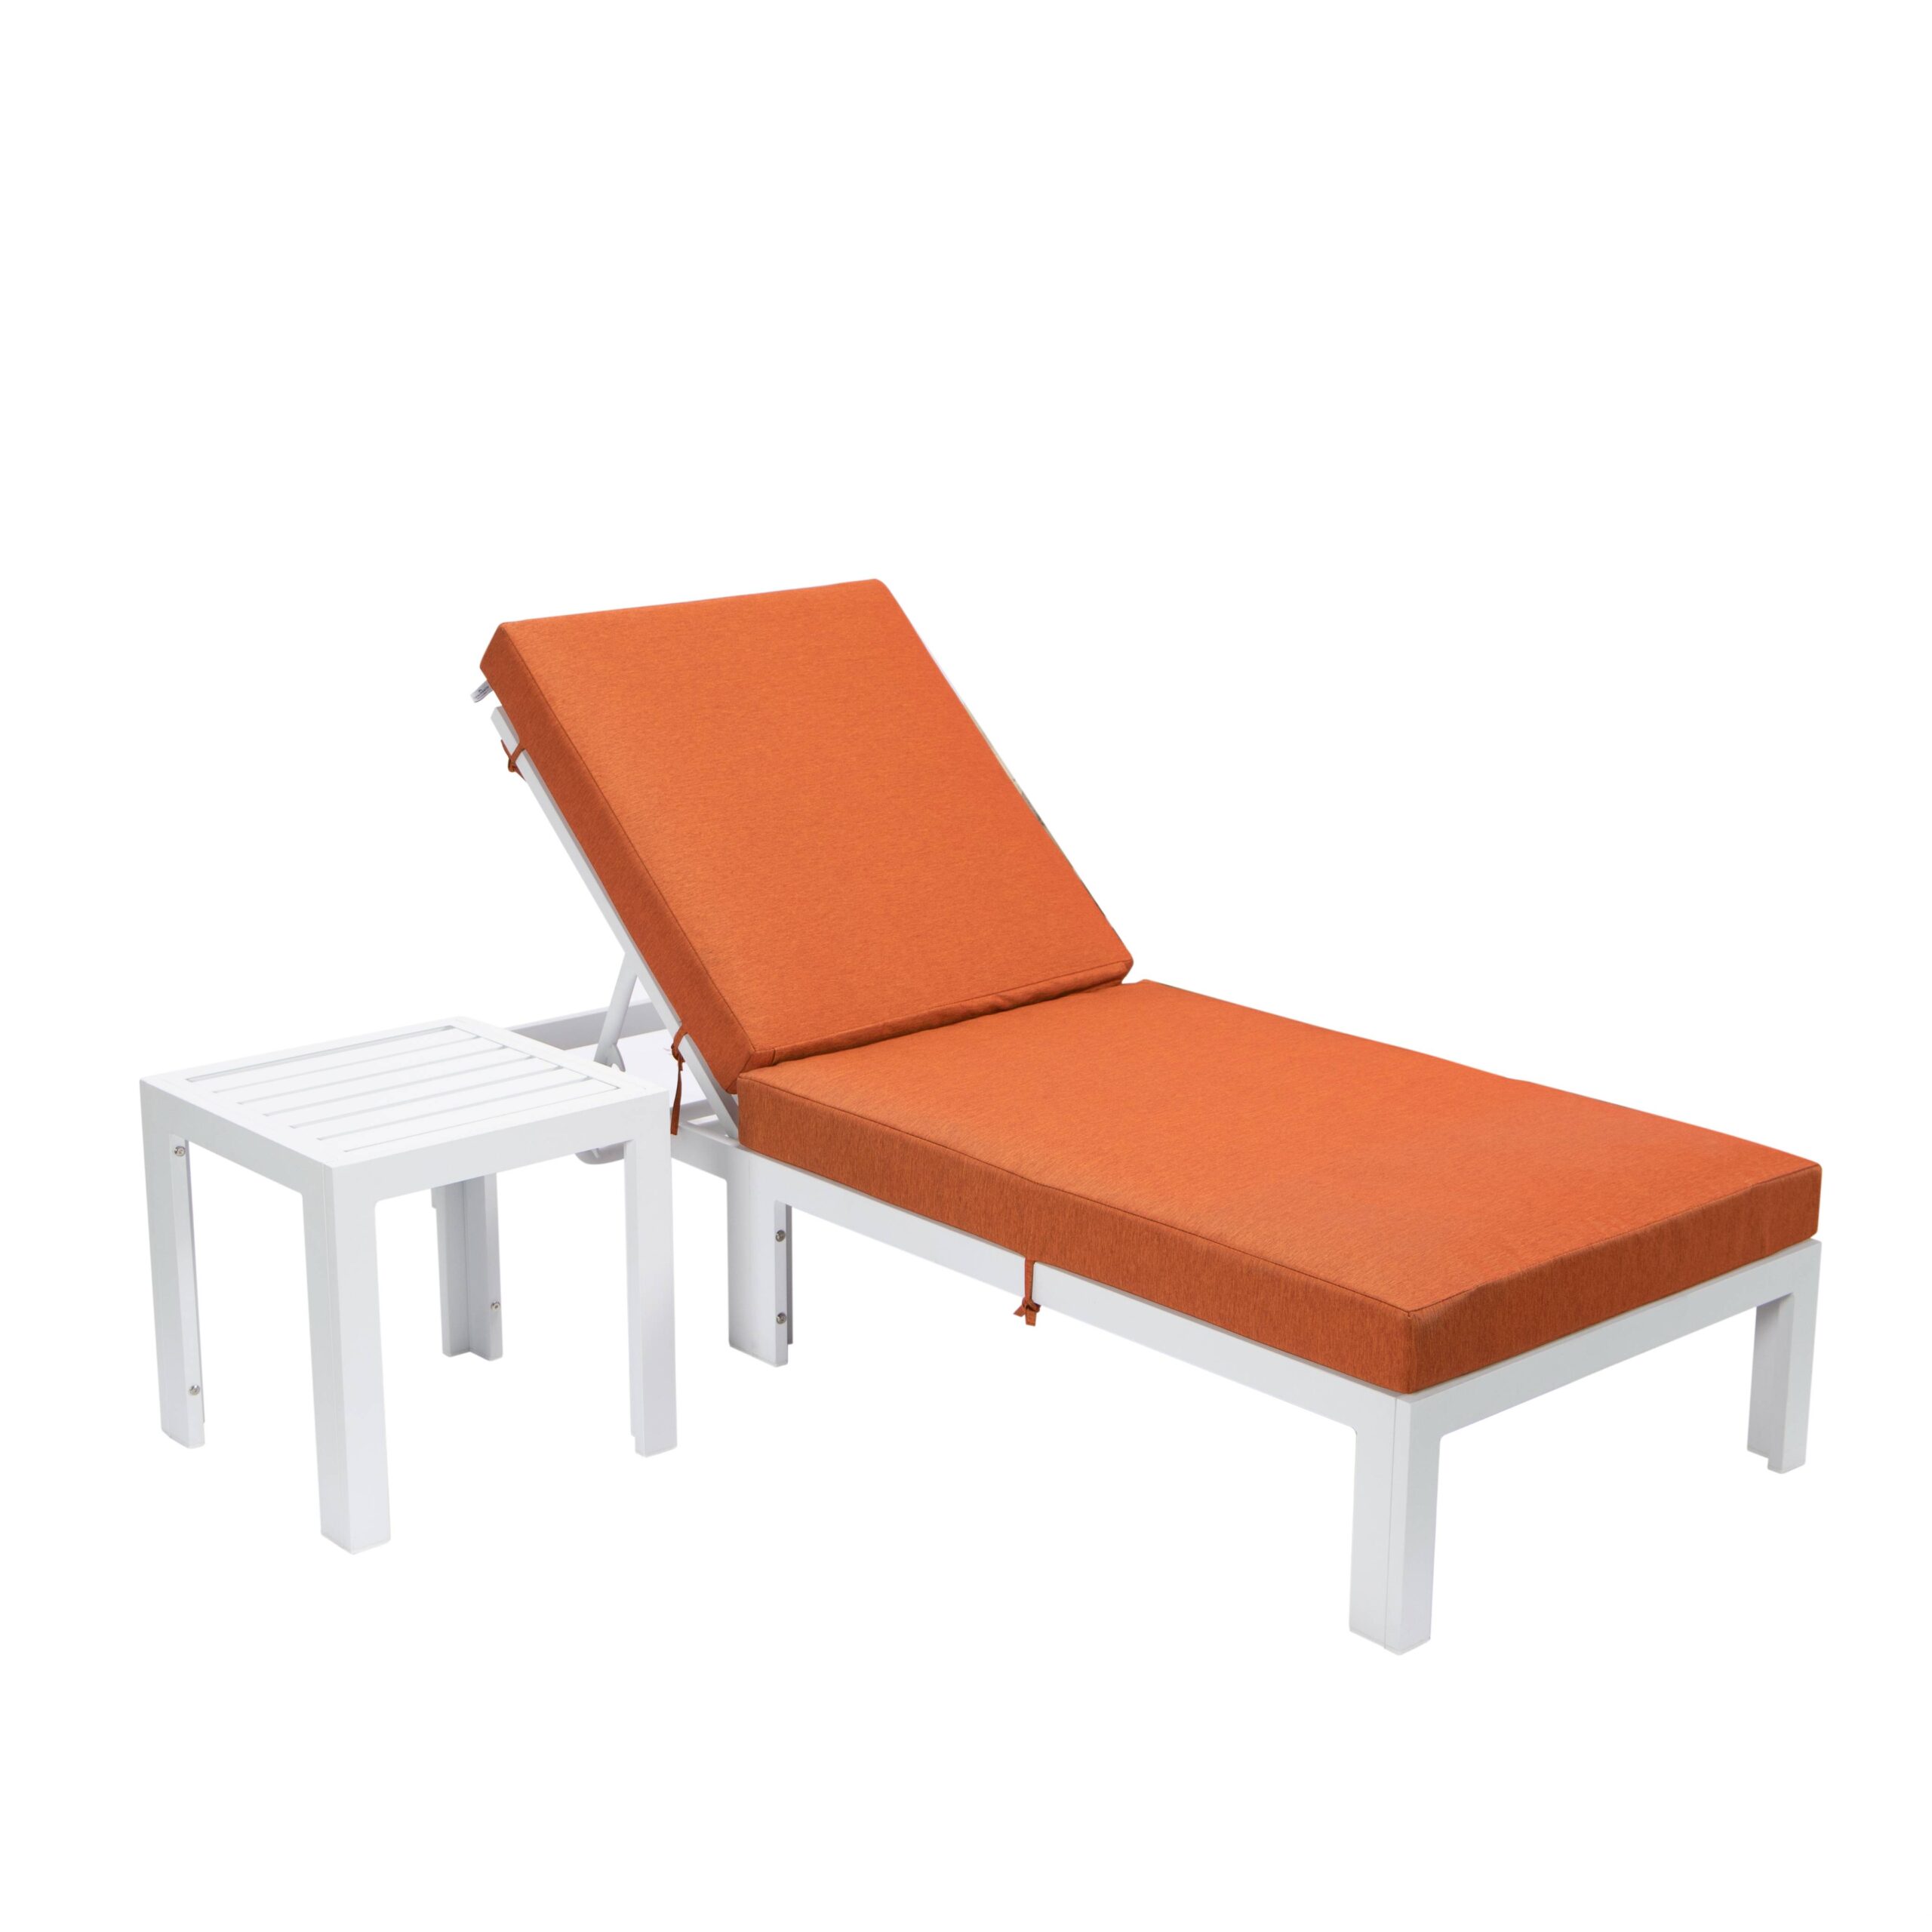 LeisureMod Chelsea Modern White Aluminum Outdoor Chaise Lounge Chair With Side Table & Orange Cushions - image 1 of 13